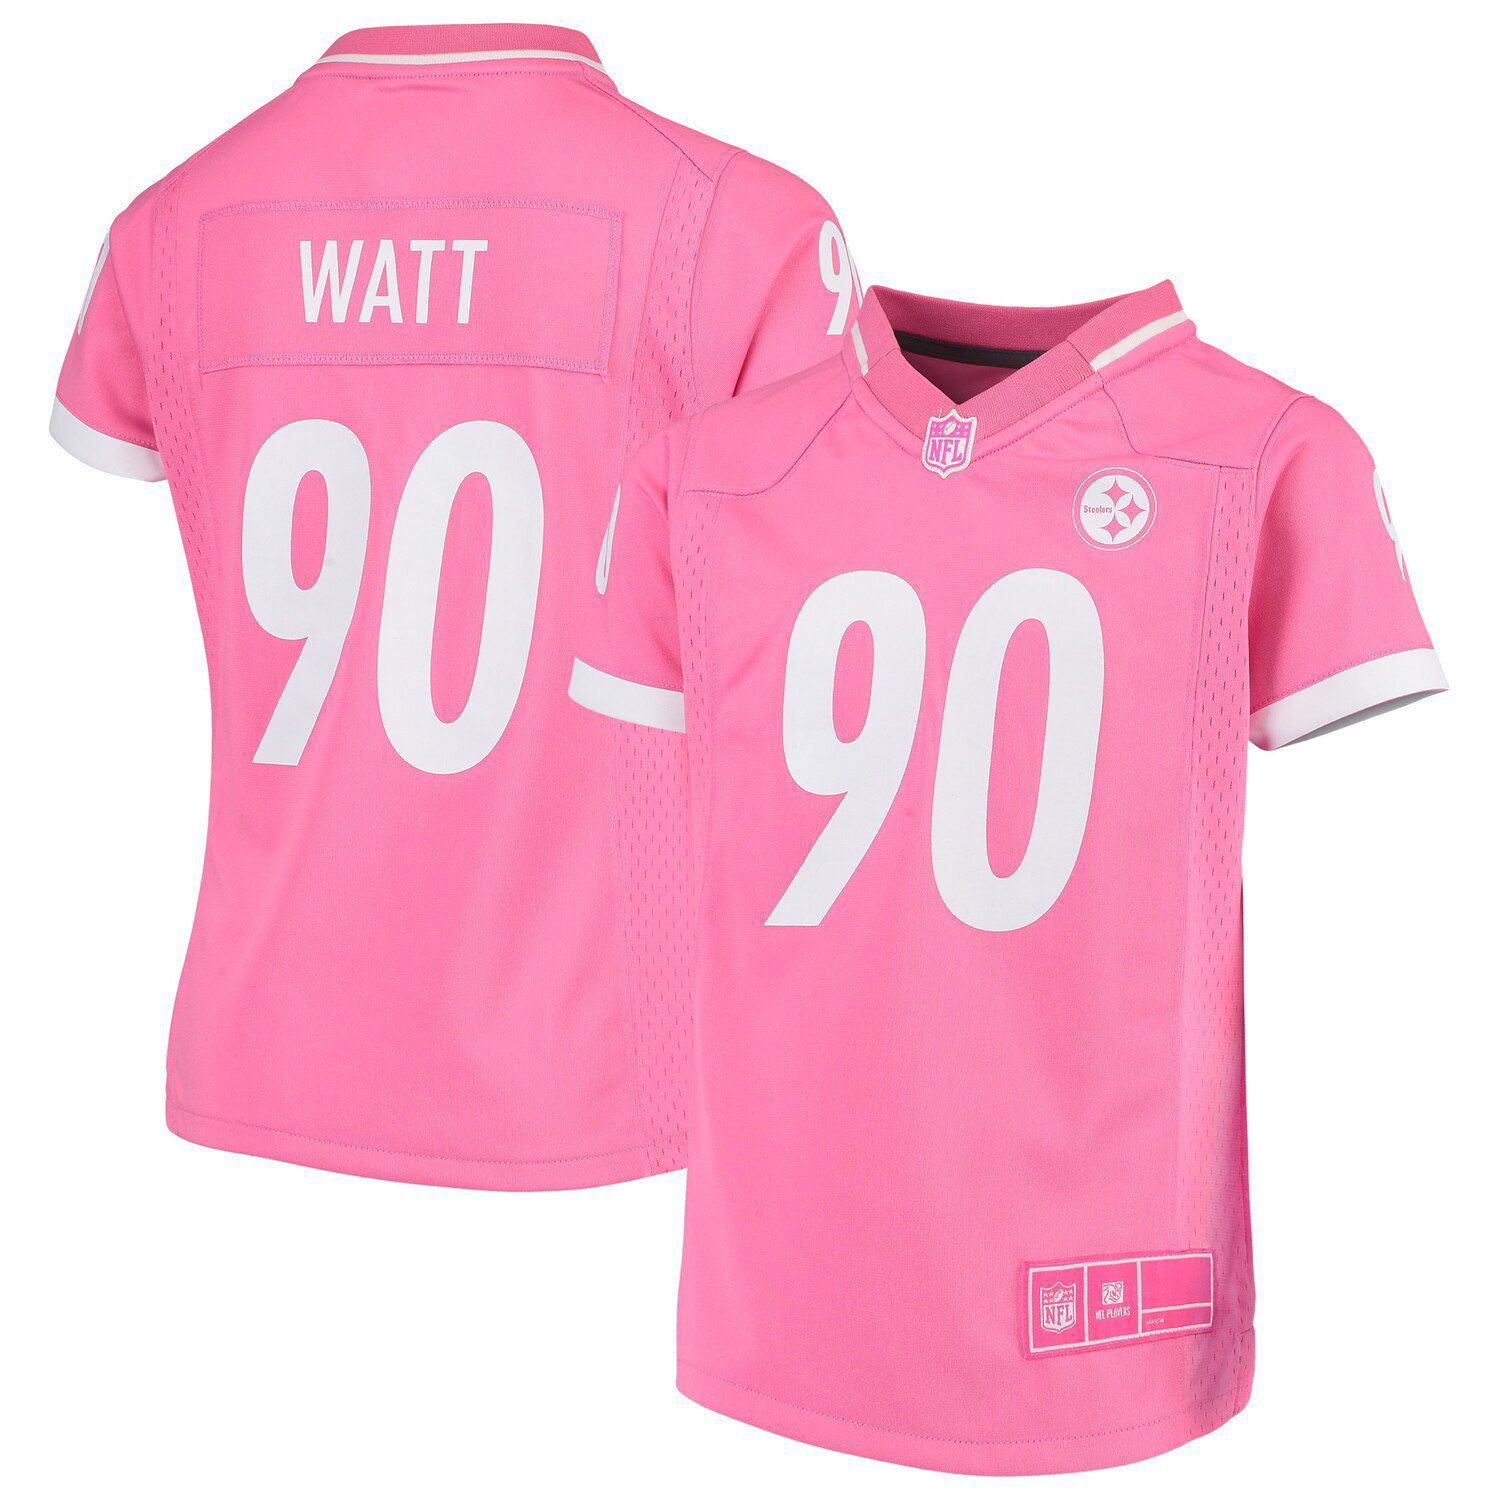 pittsburgh steelers pink jersey